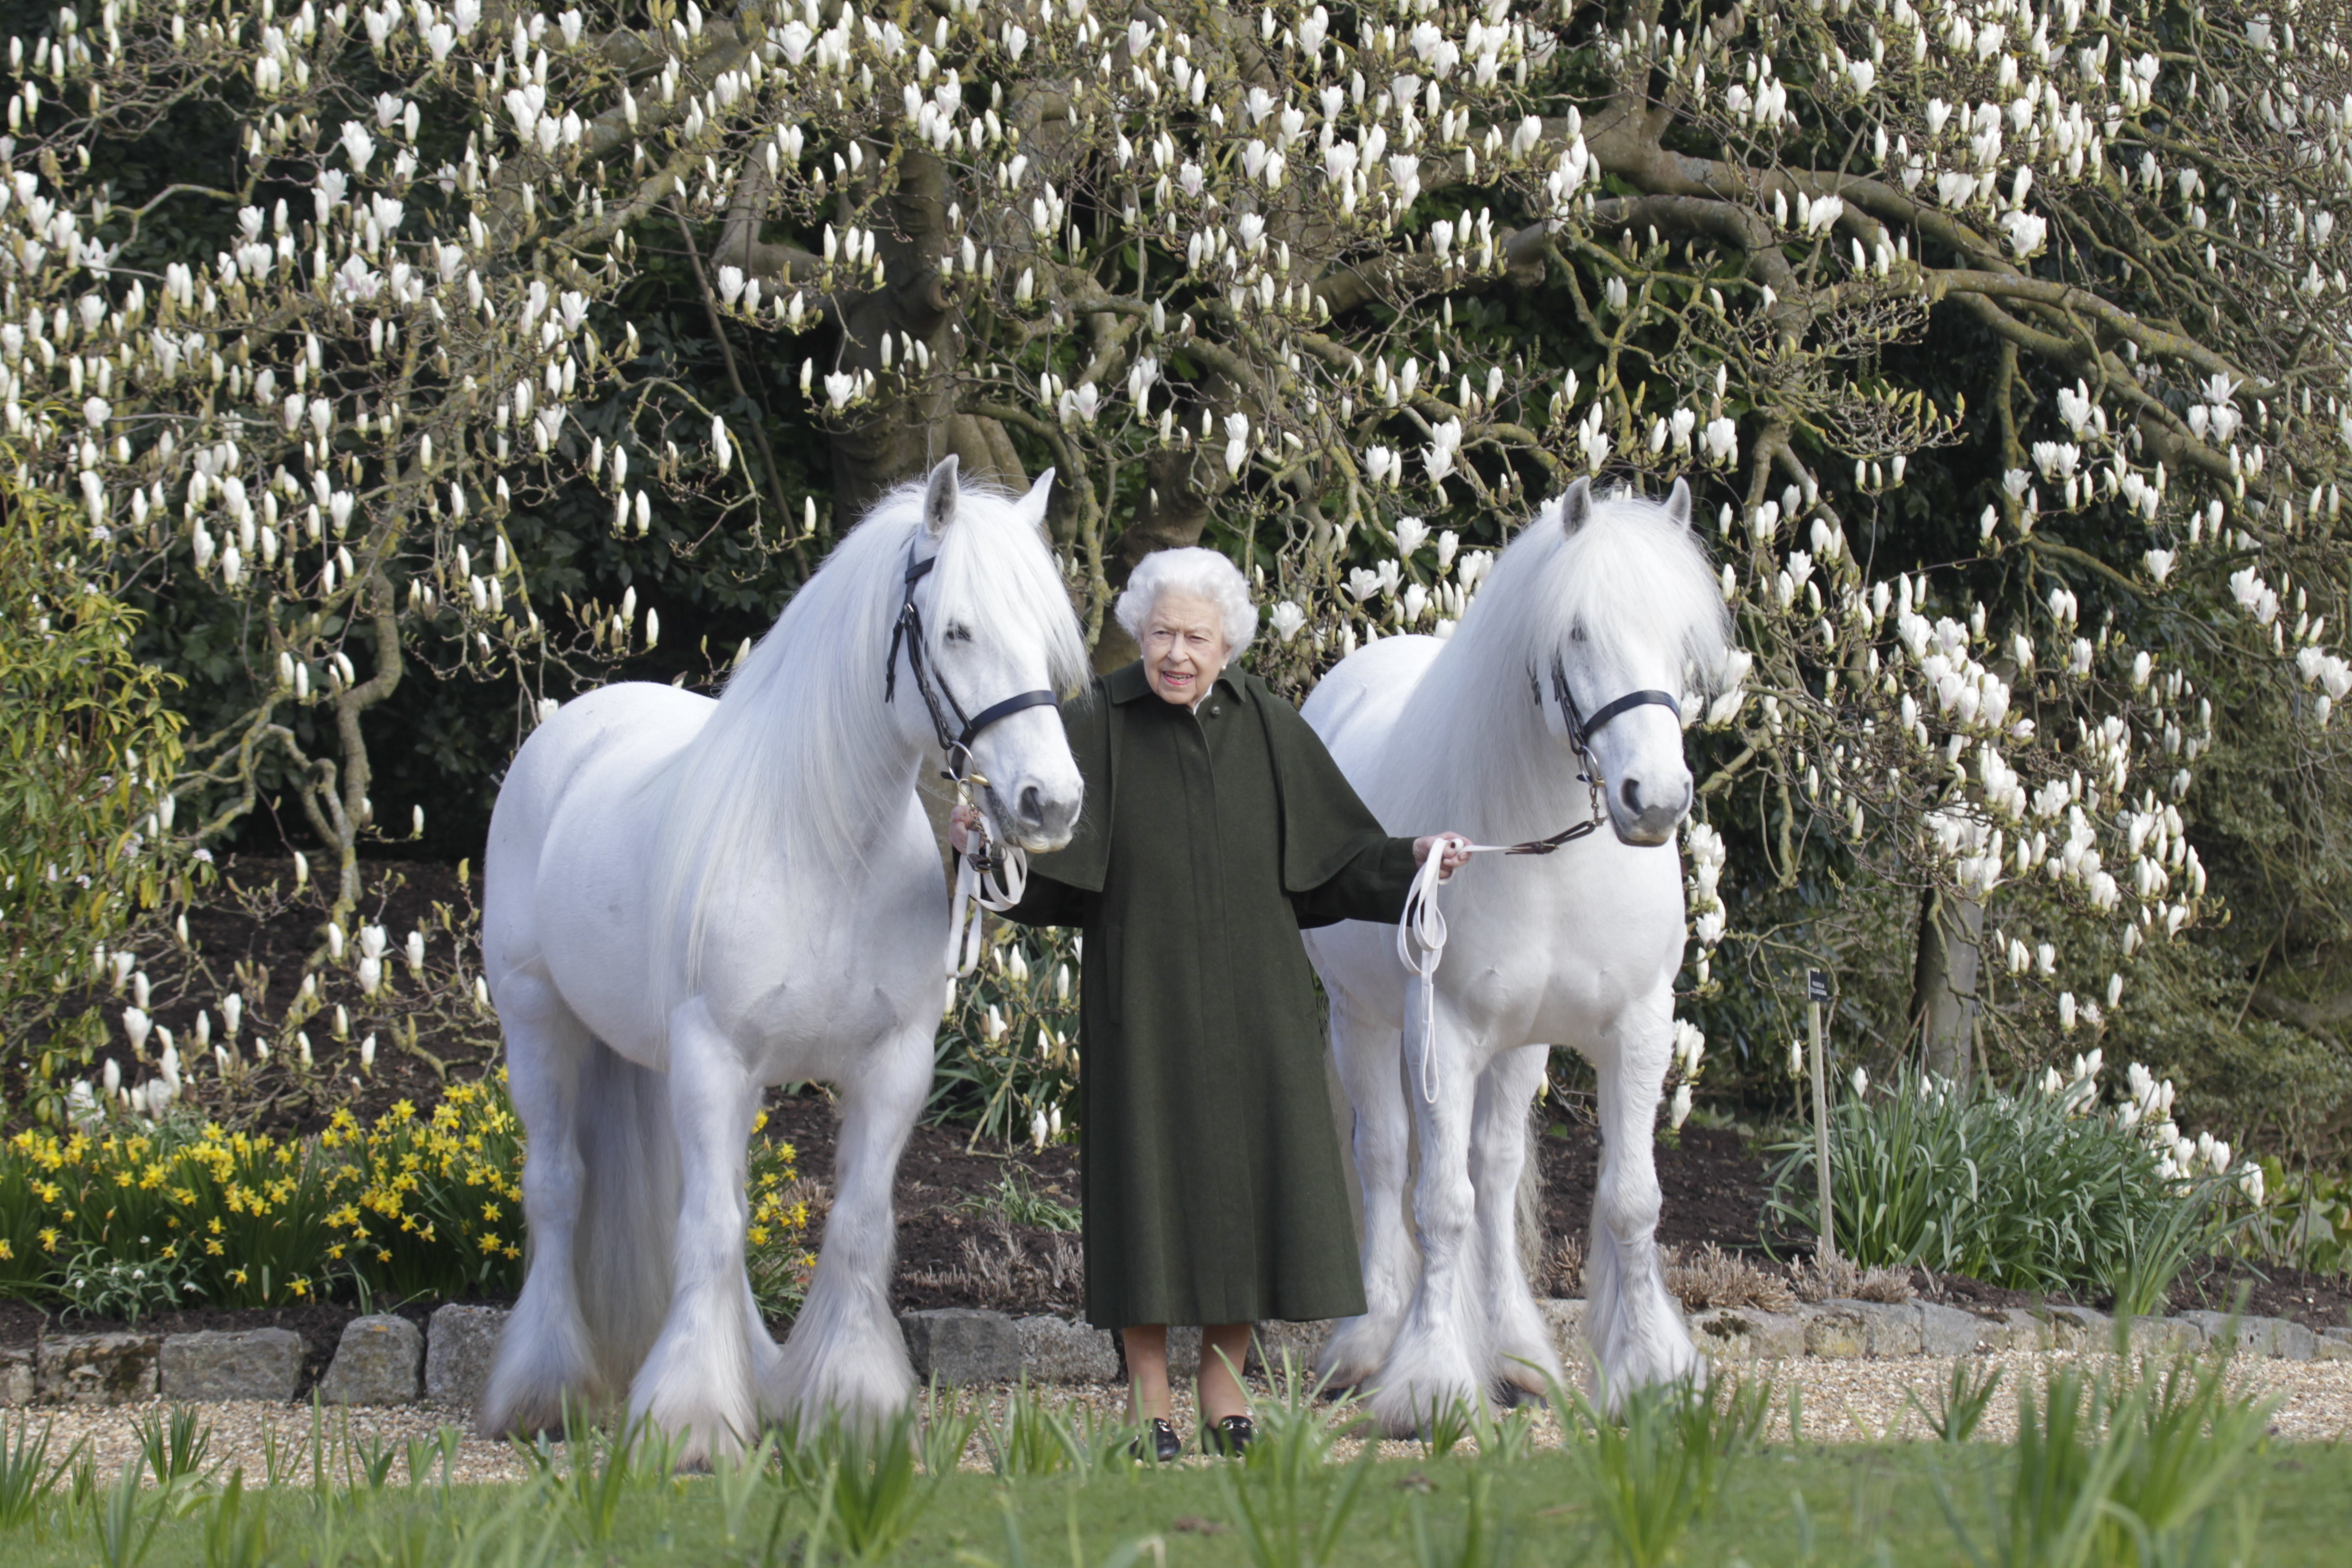 The Queen released this photo to mark her 96th birthday